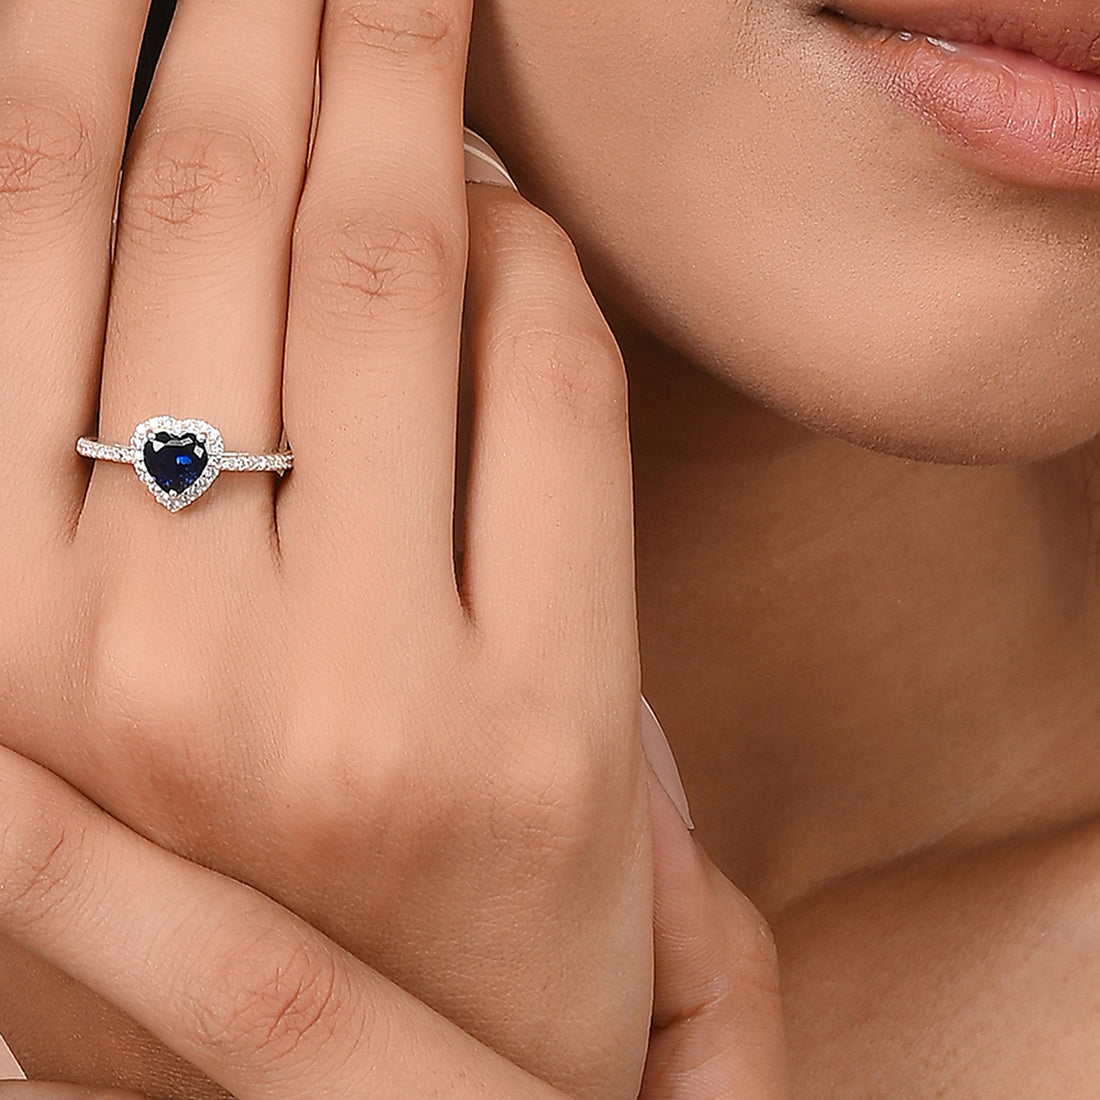 925 Sterling Silver Blue Heart CZ Solitaire Ring